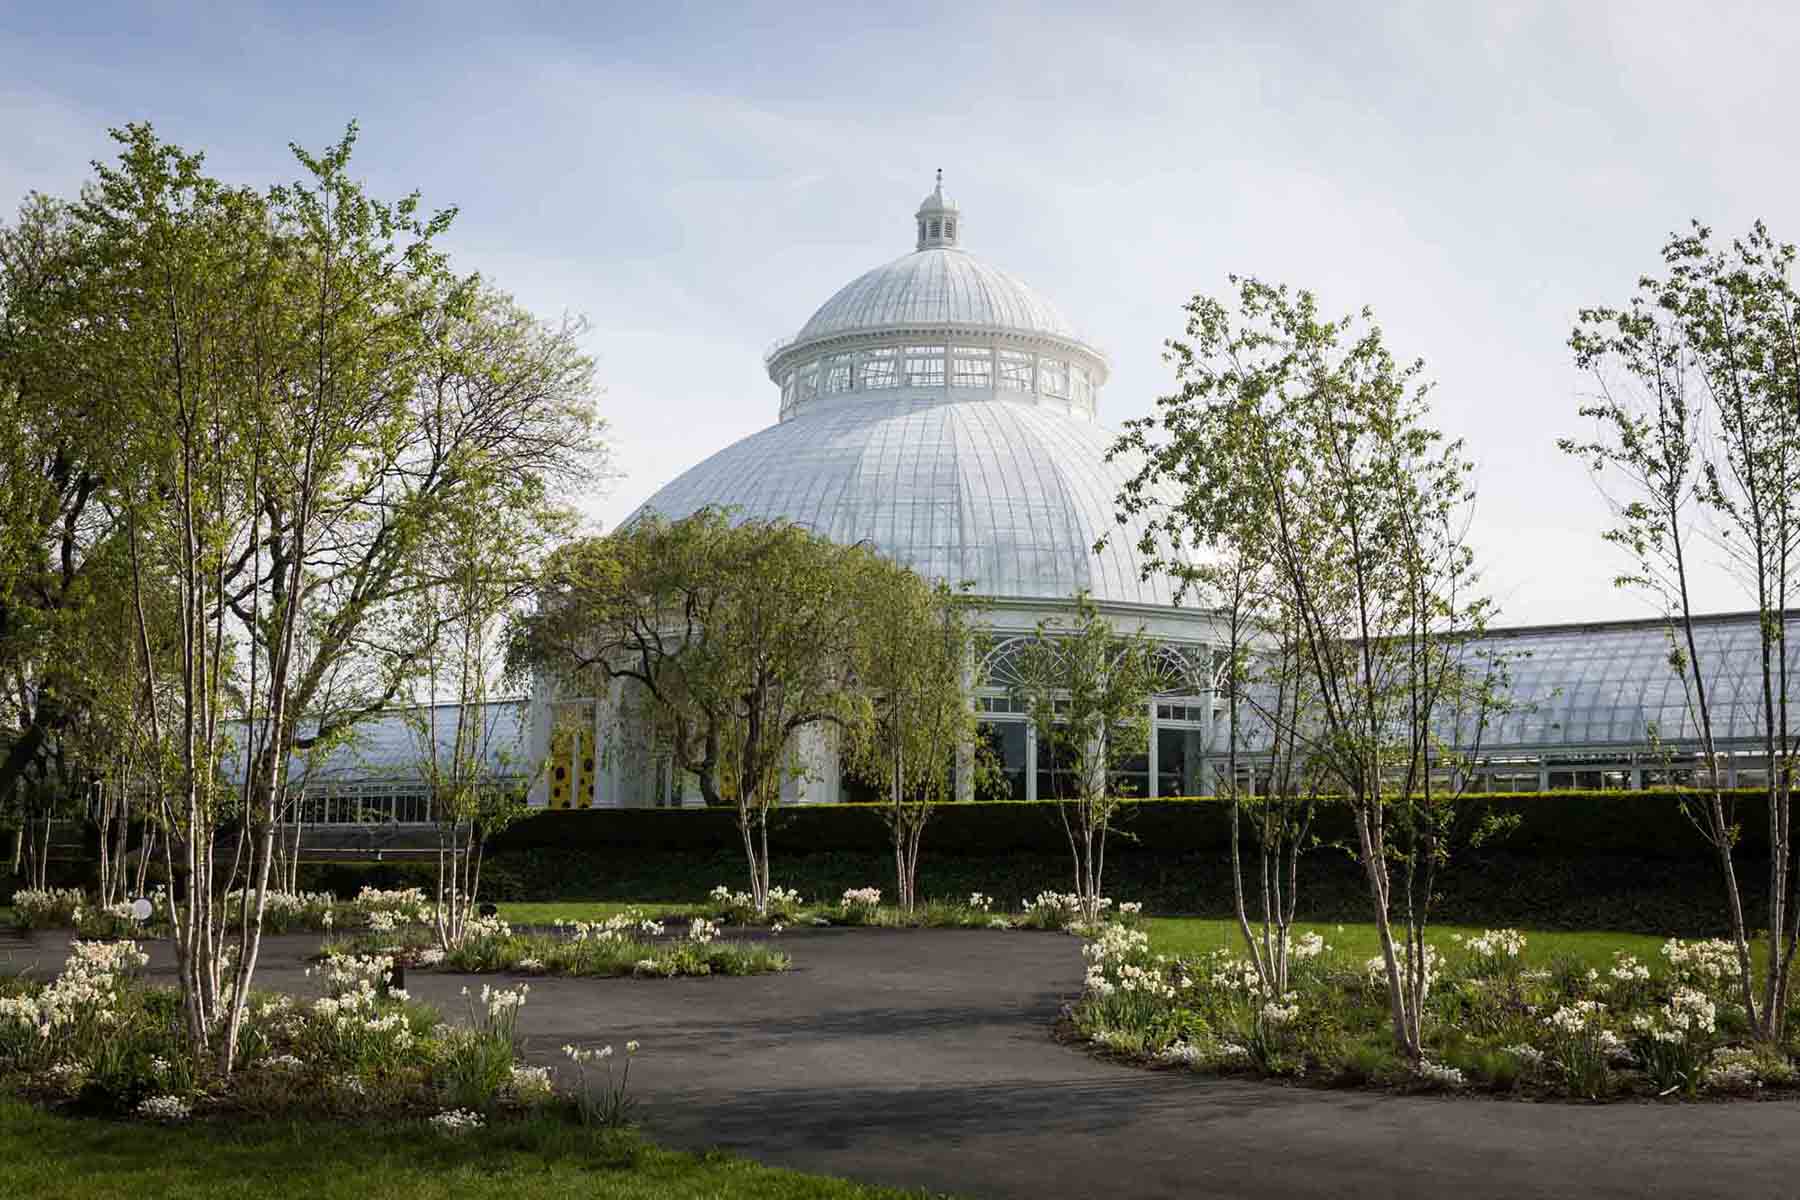 The Haupt Conservatory at the New York Botanical Garden